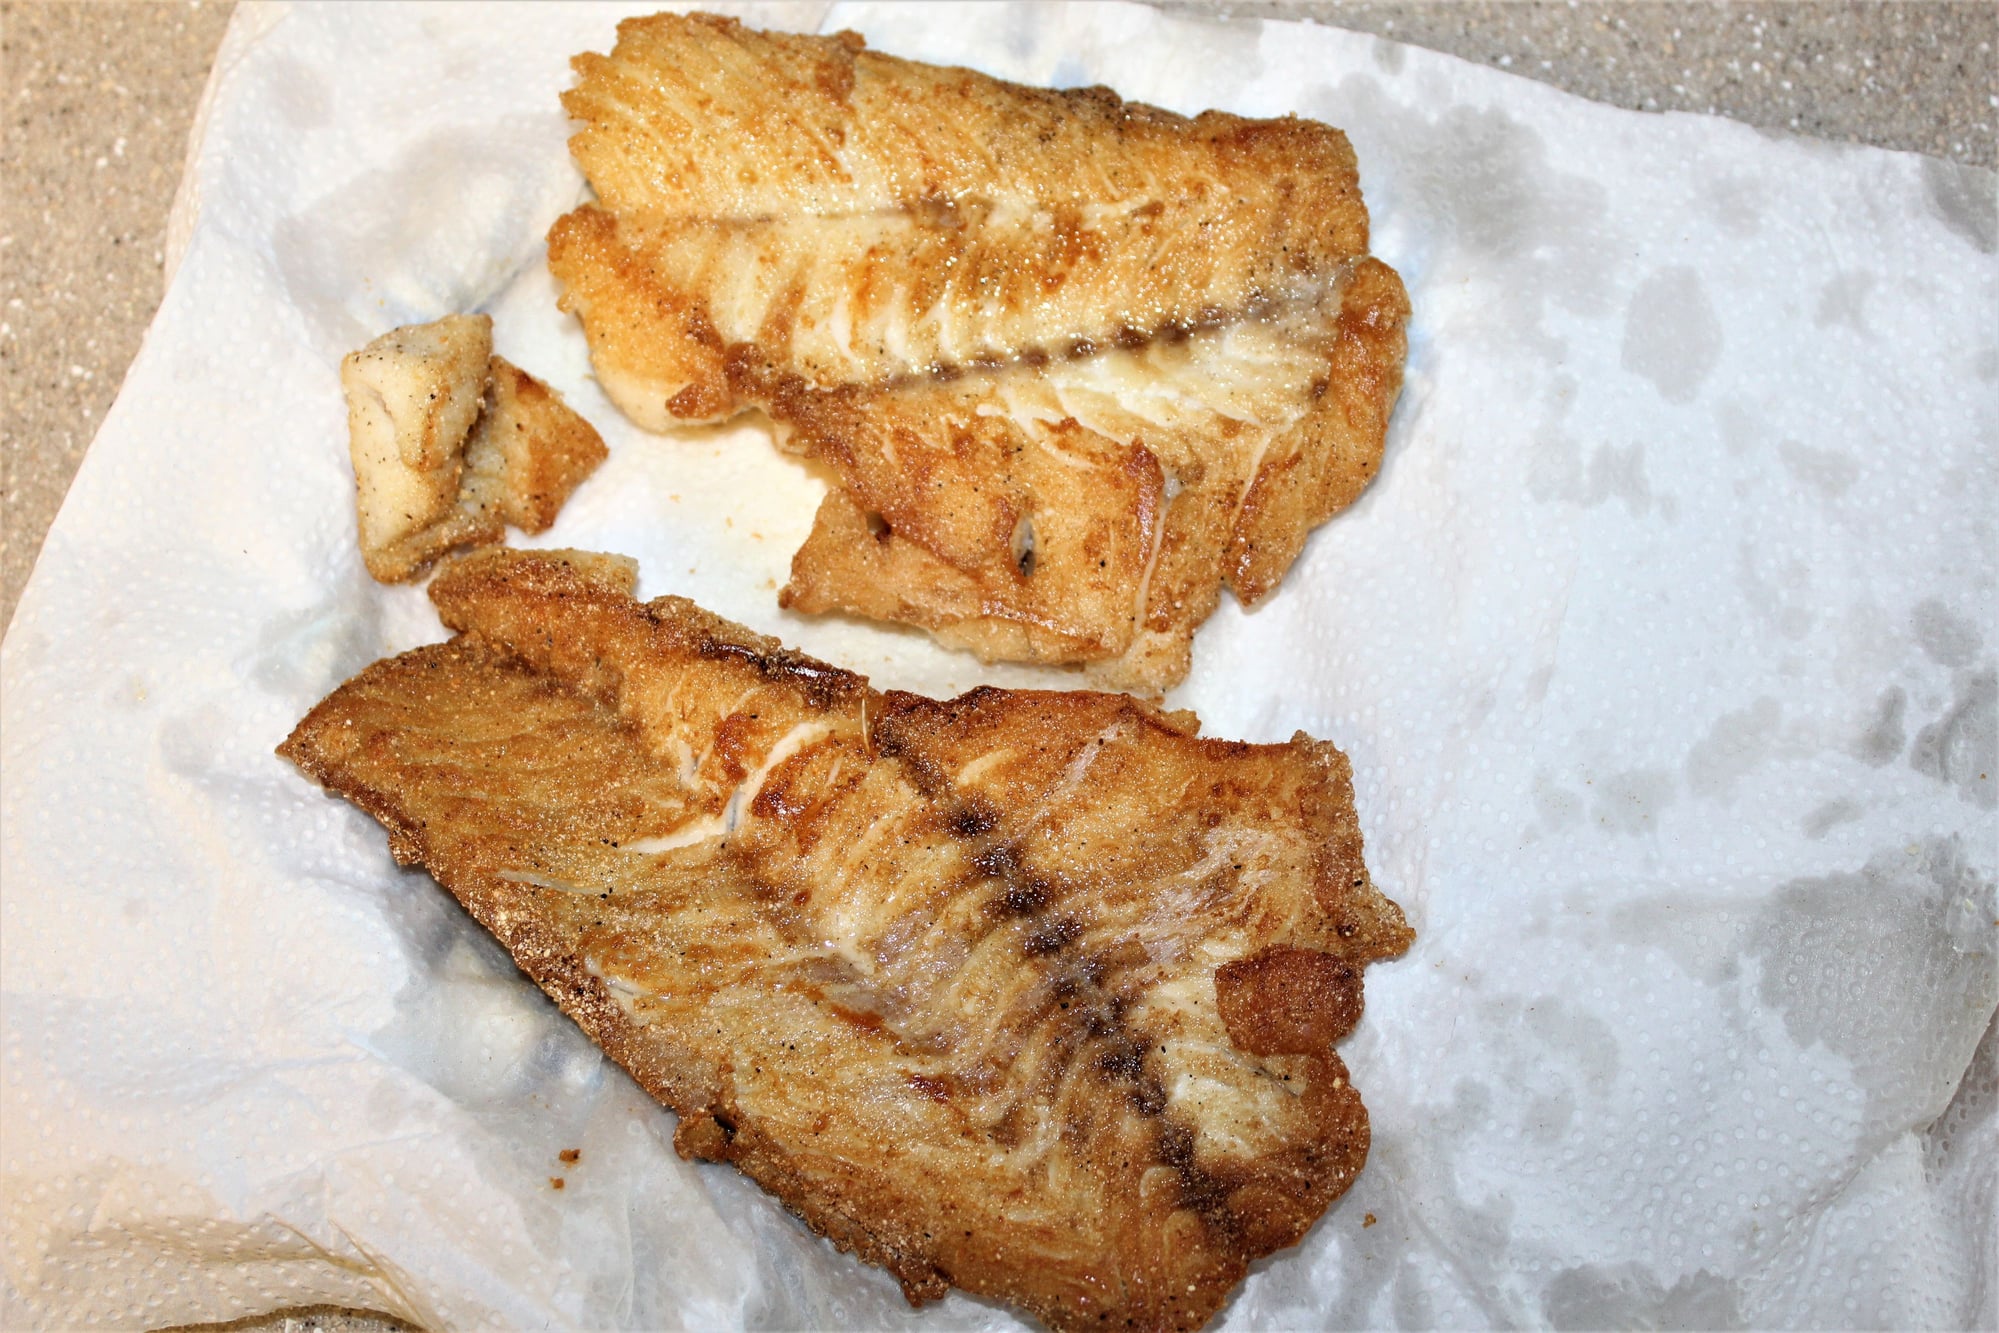 I Grew Up Eating Deep Fried Fish - Page 3 - The Hull Truth - Boating ...